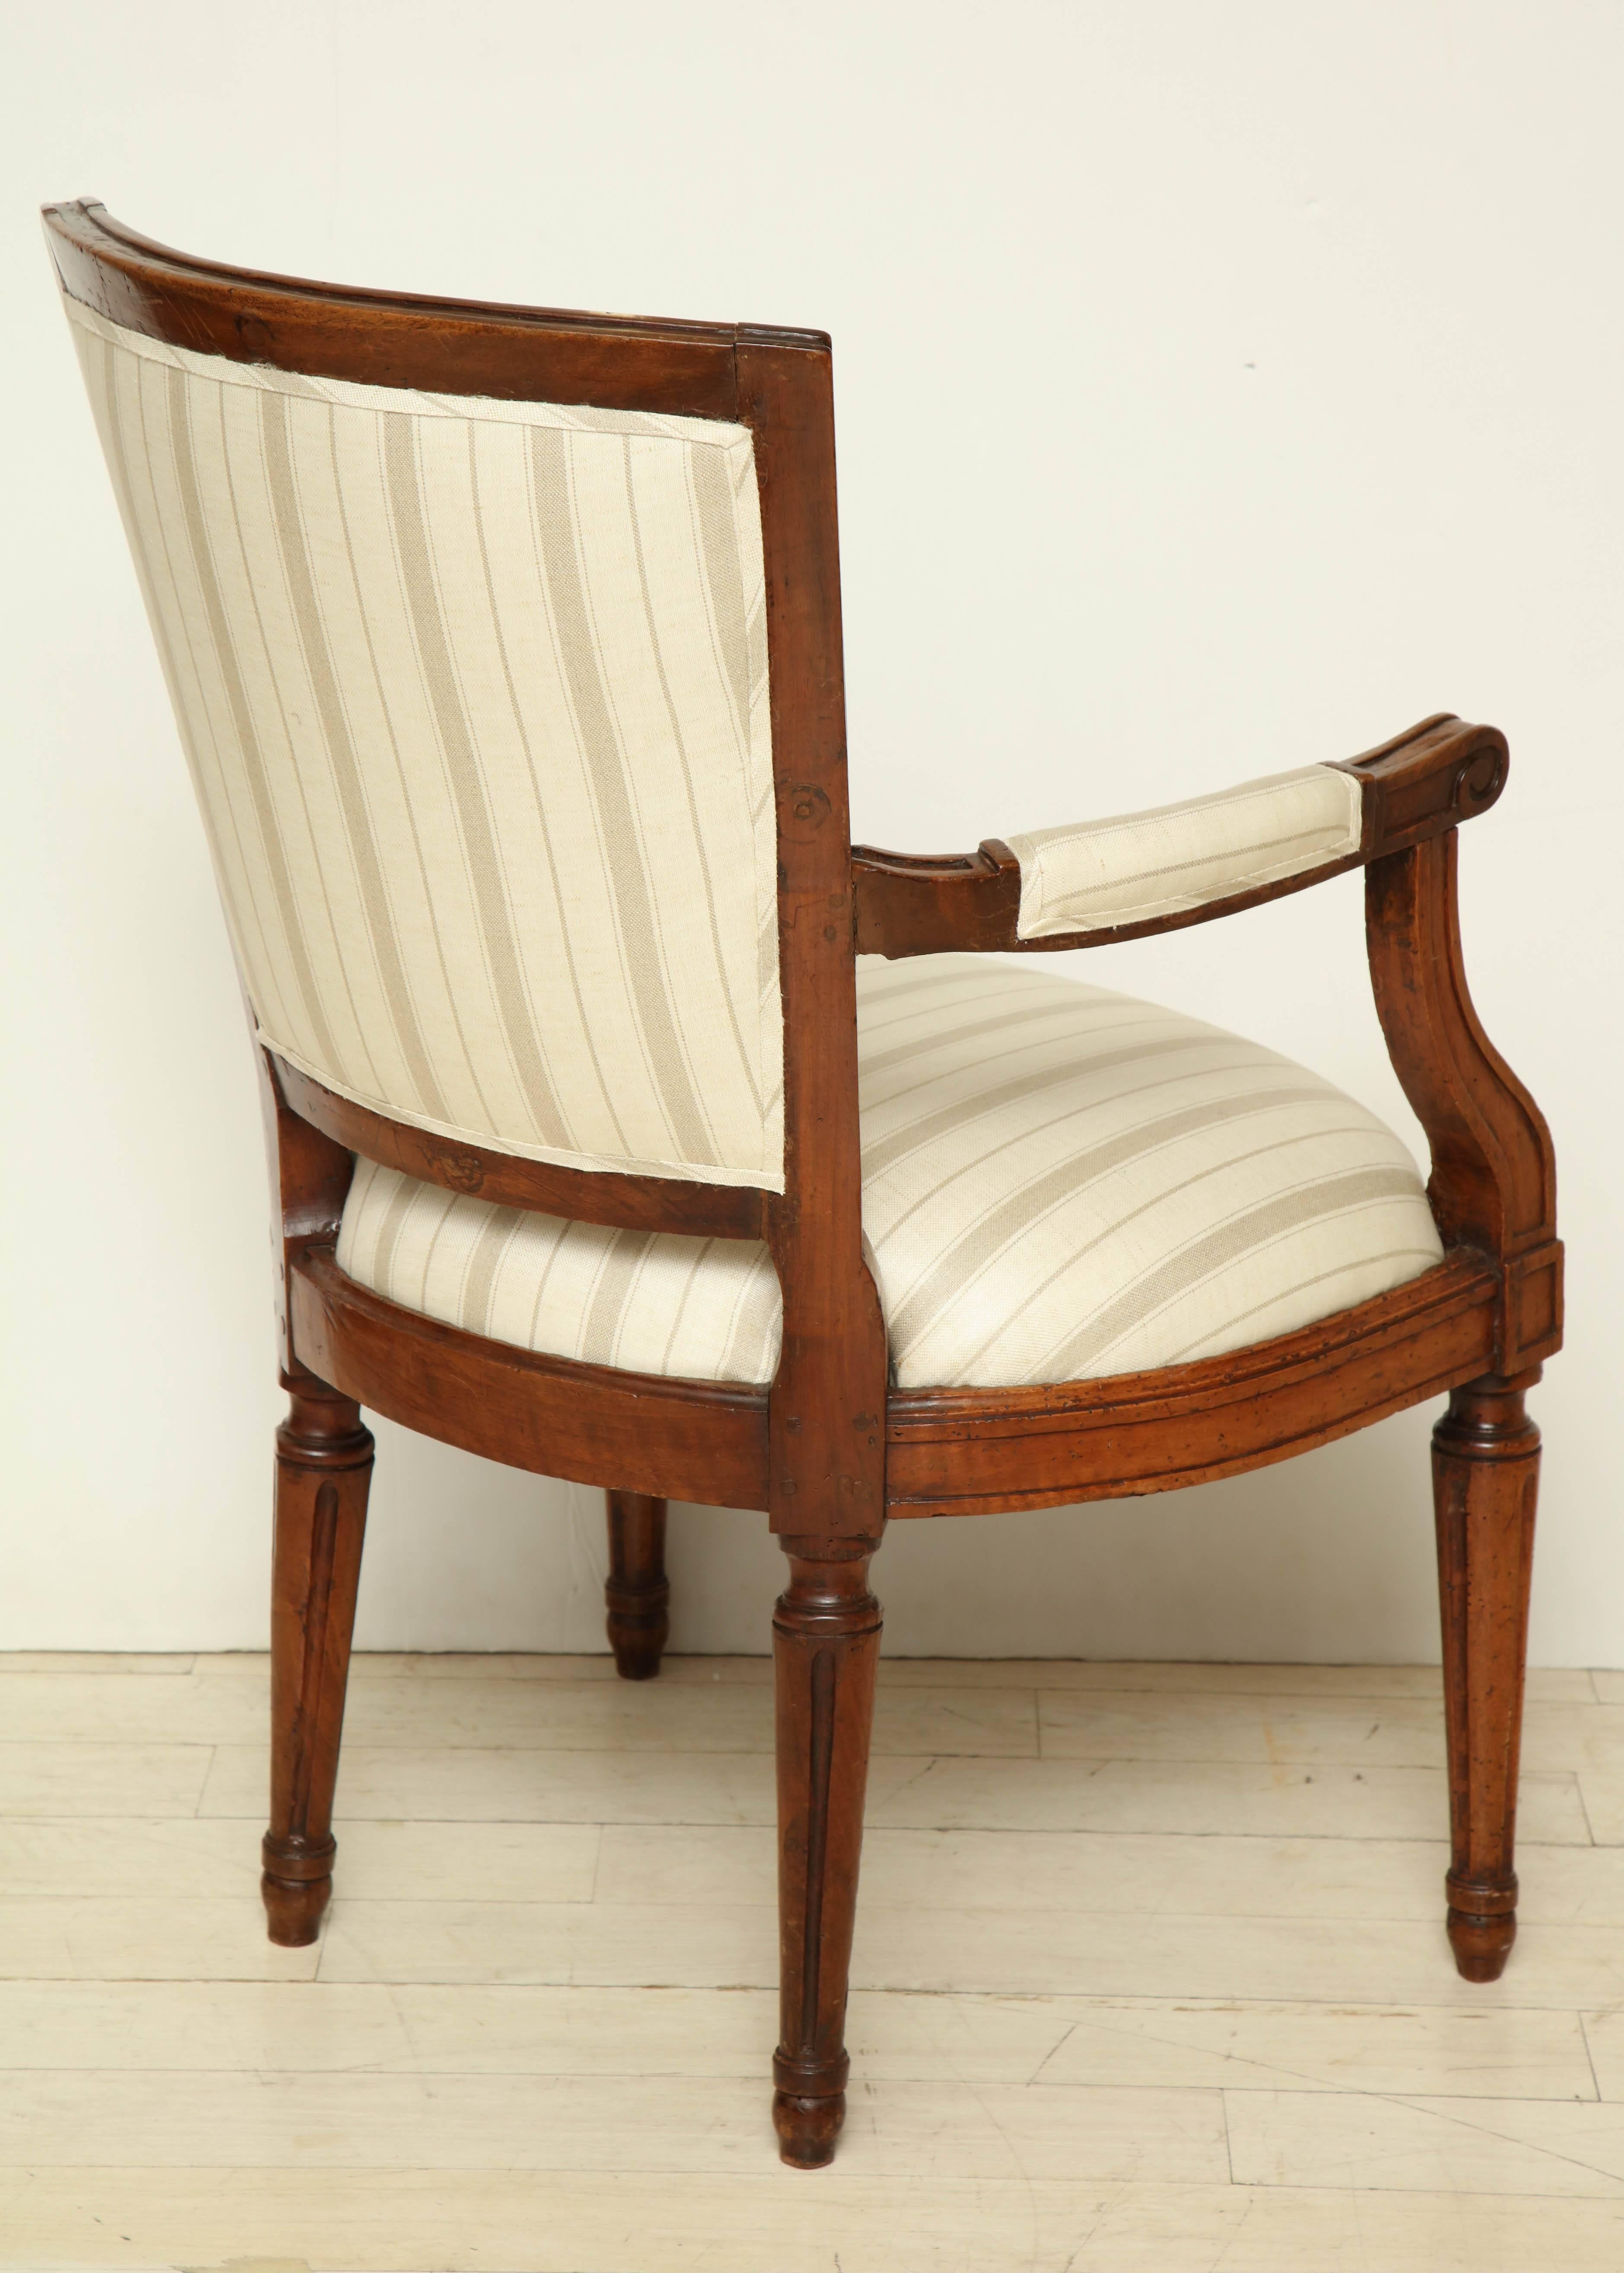 Pair of 18th Century Italian Walnut Armchairs Upholstered in Striped Linen 3